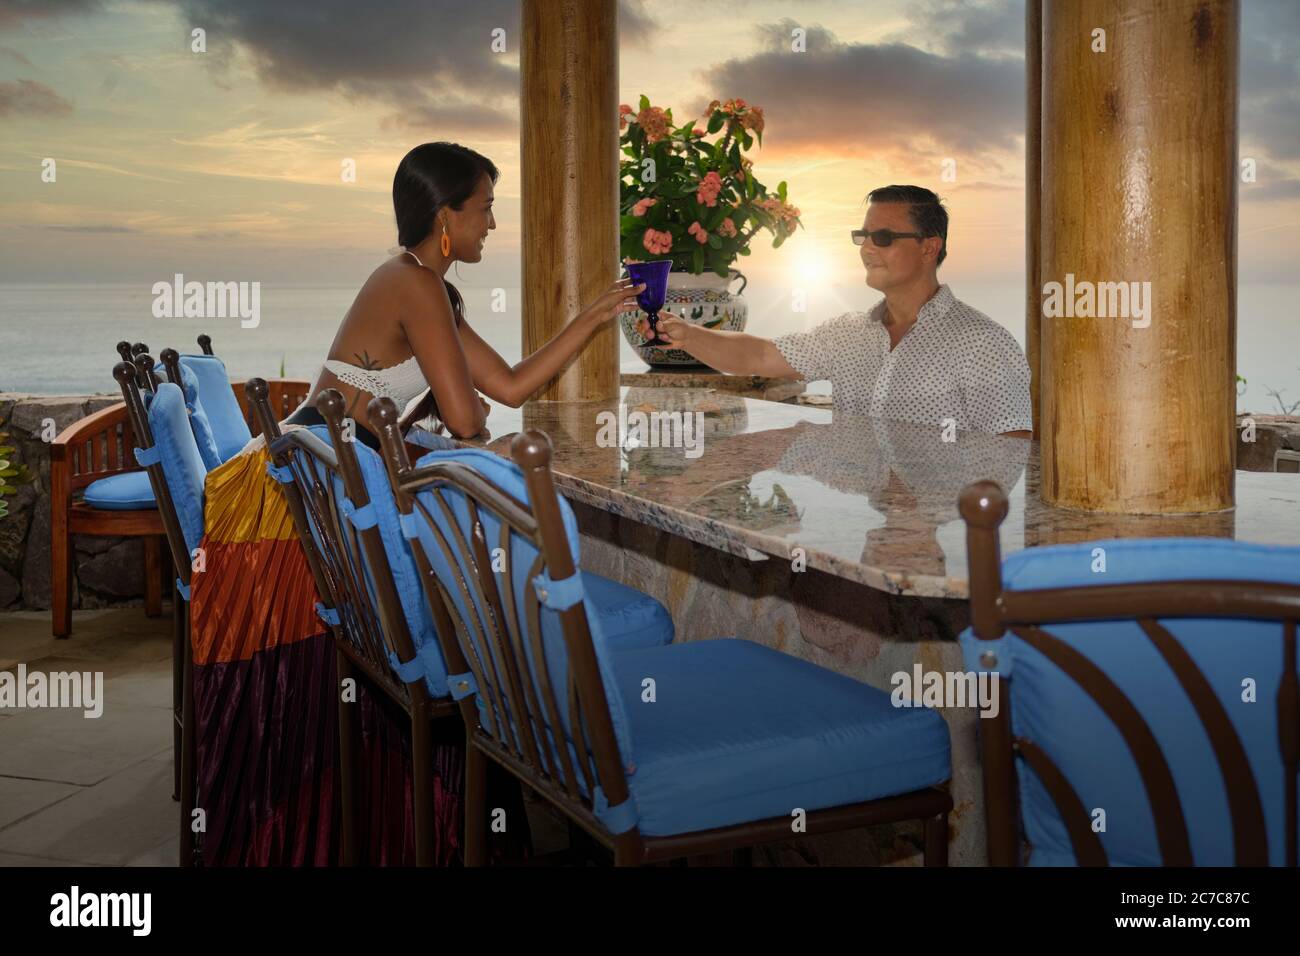 Vacation scene - woman receiving drink from barkeeper at an outdoor bar, Puerto Vallarta, Jalisco, Mexico Stock Photo